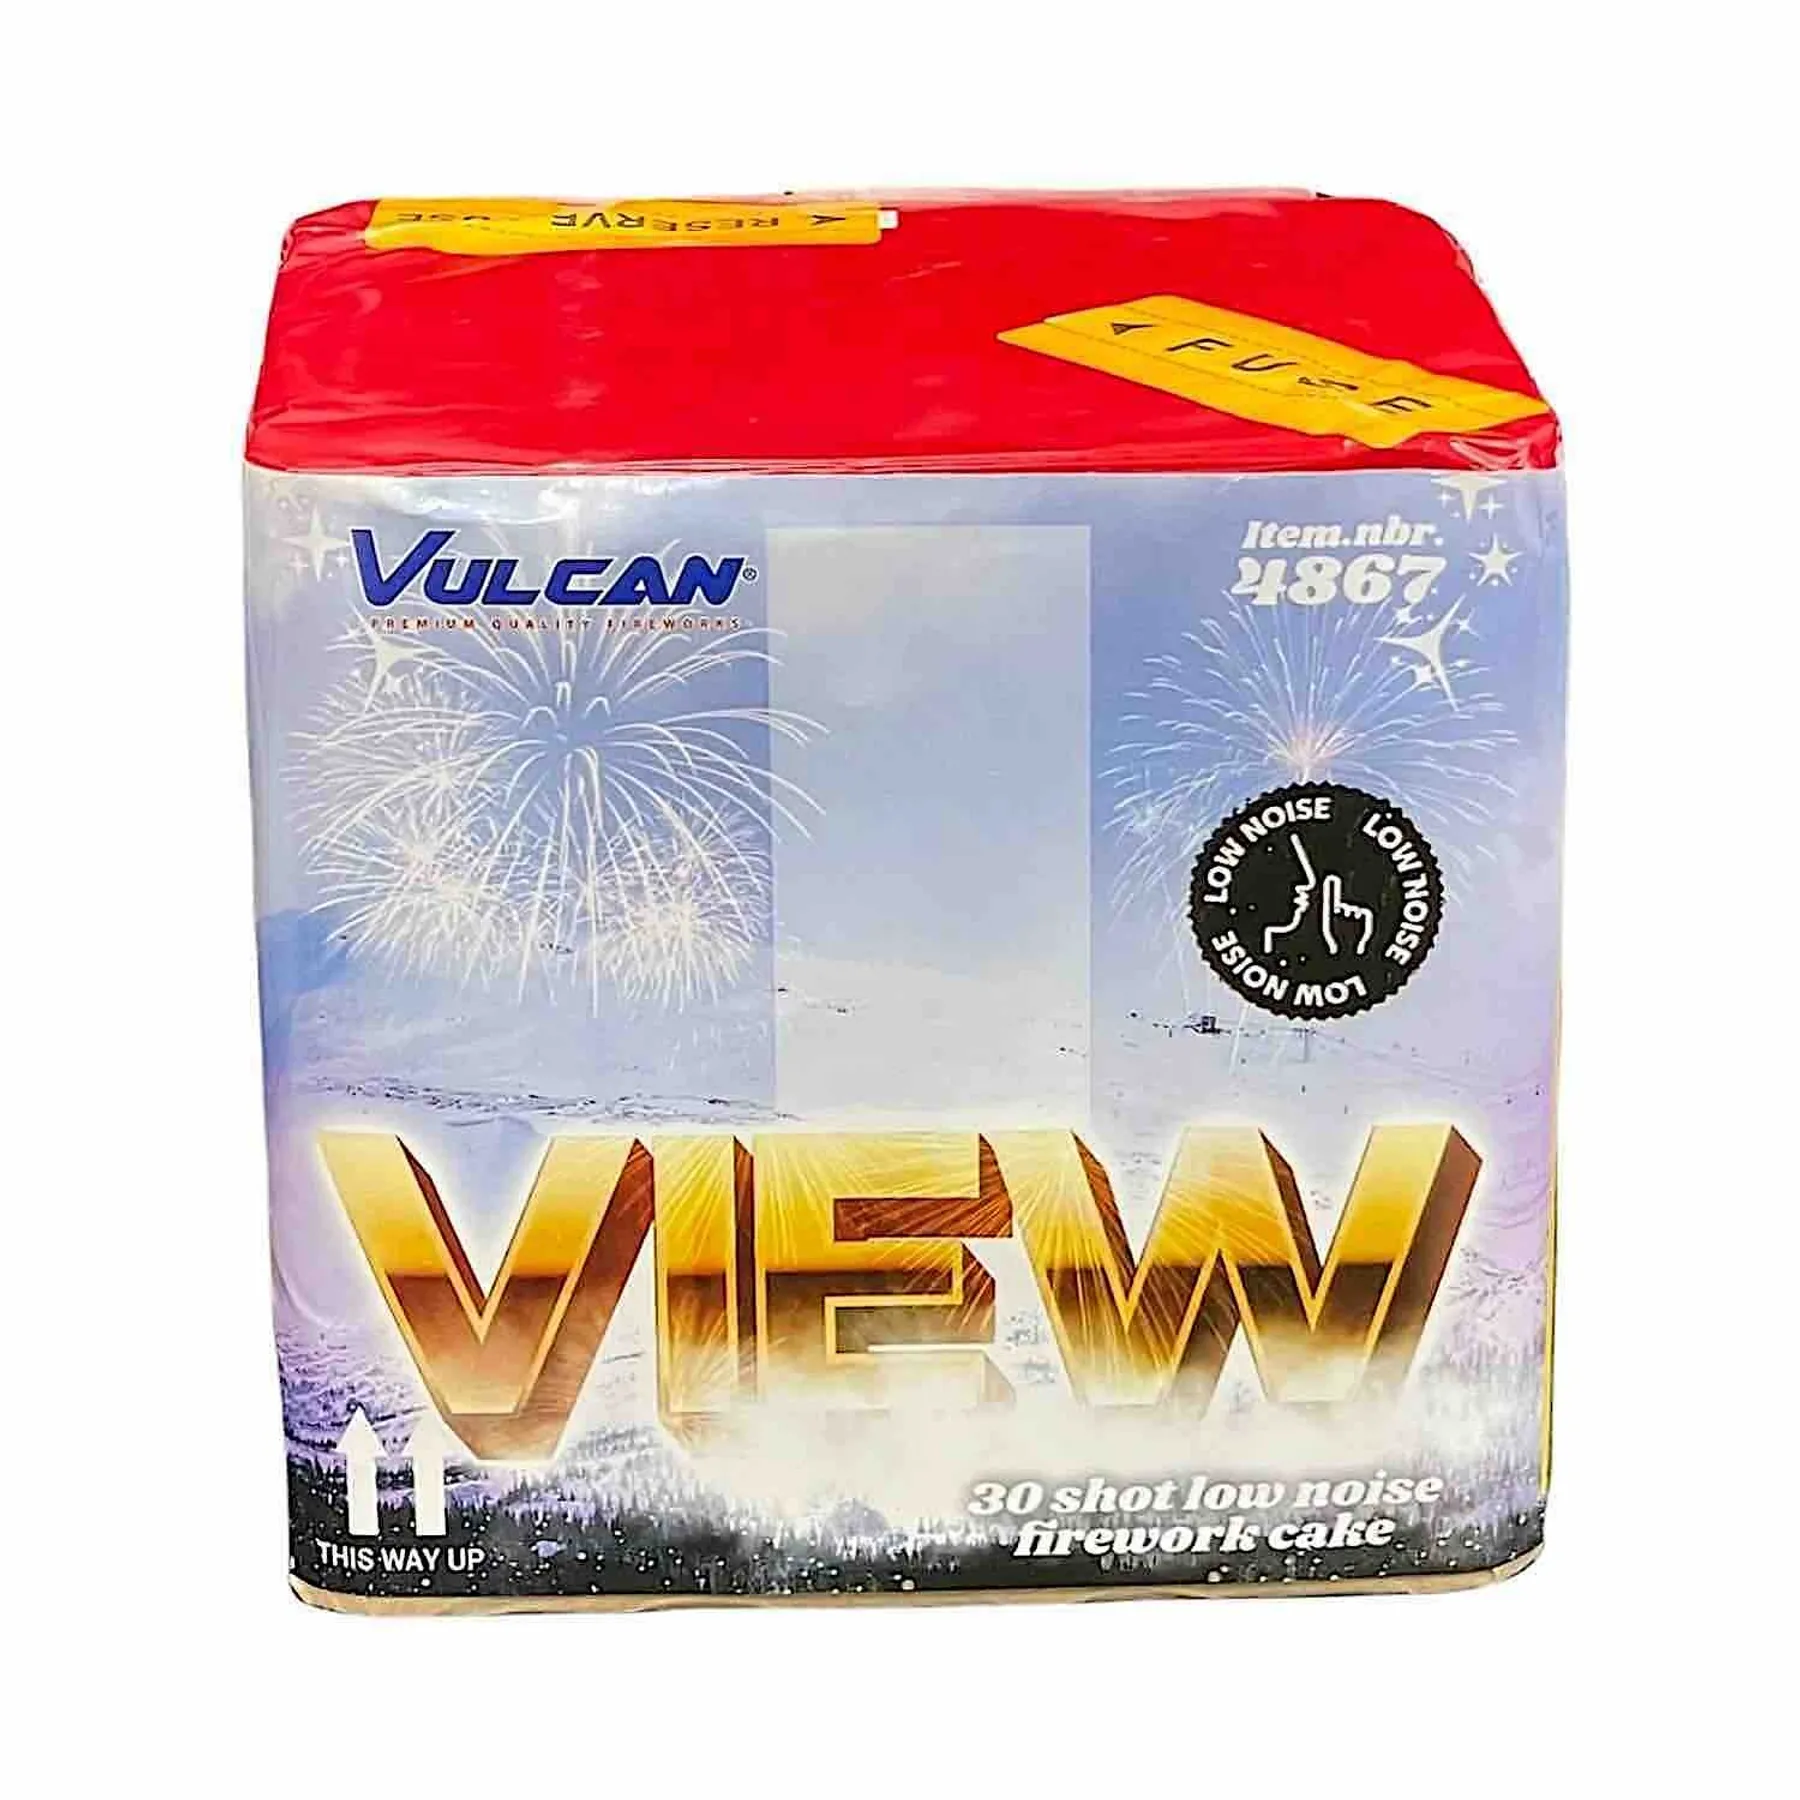 View - Low Noise Vulcan Fireworks